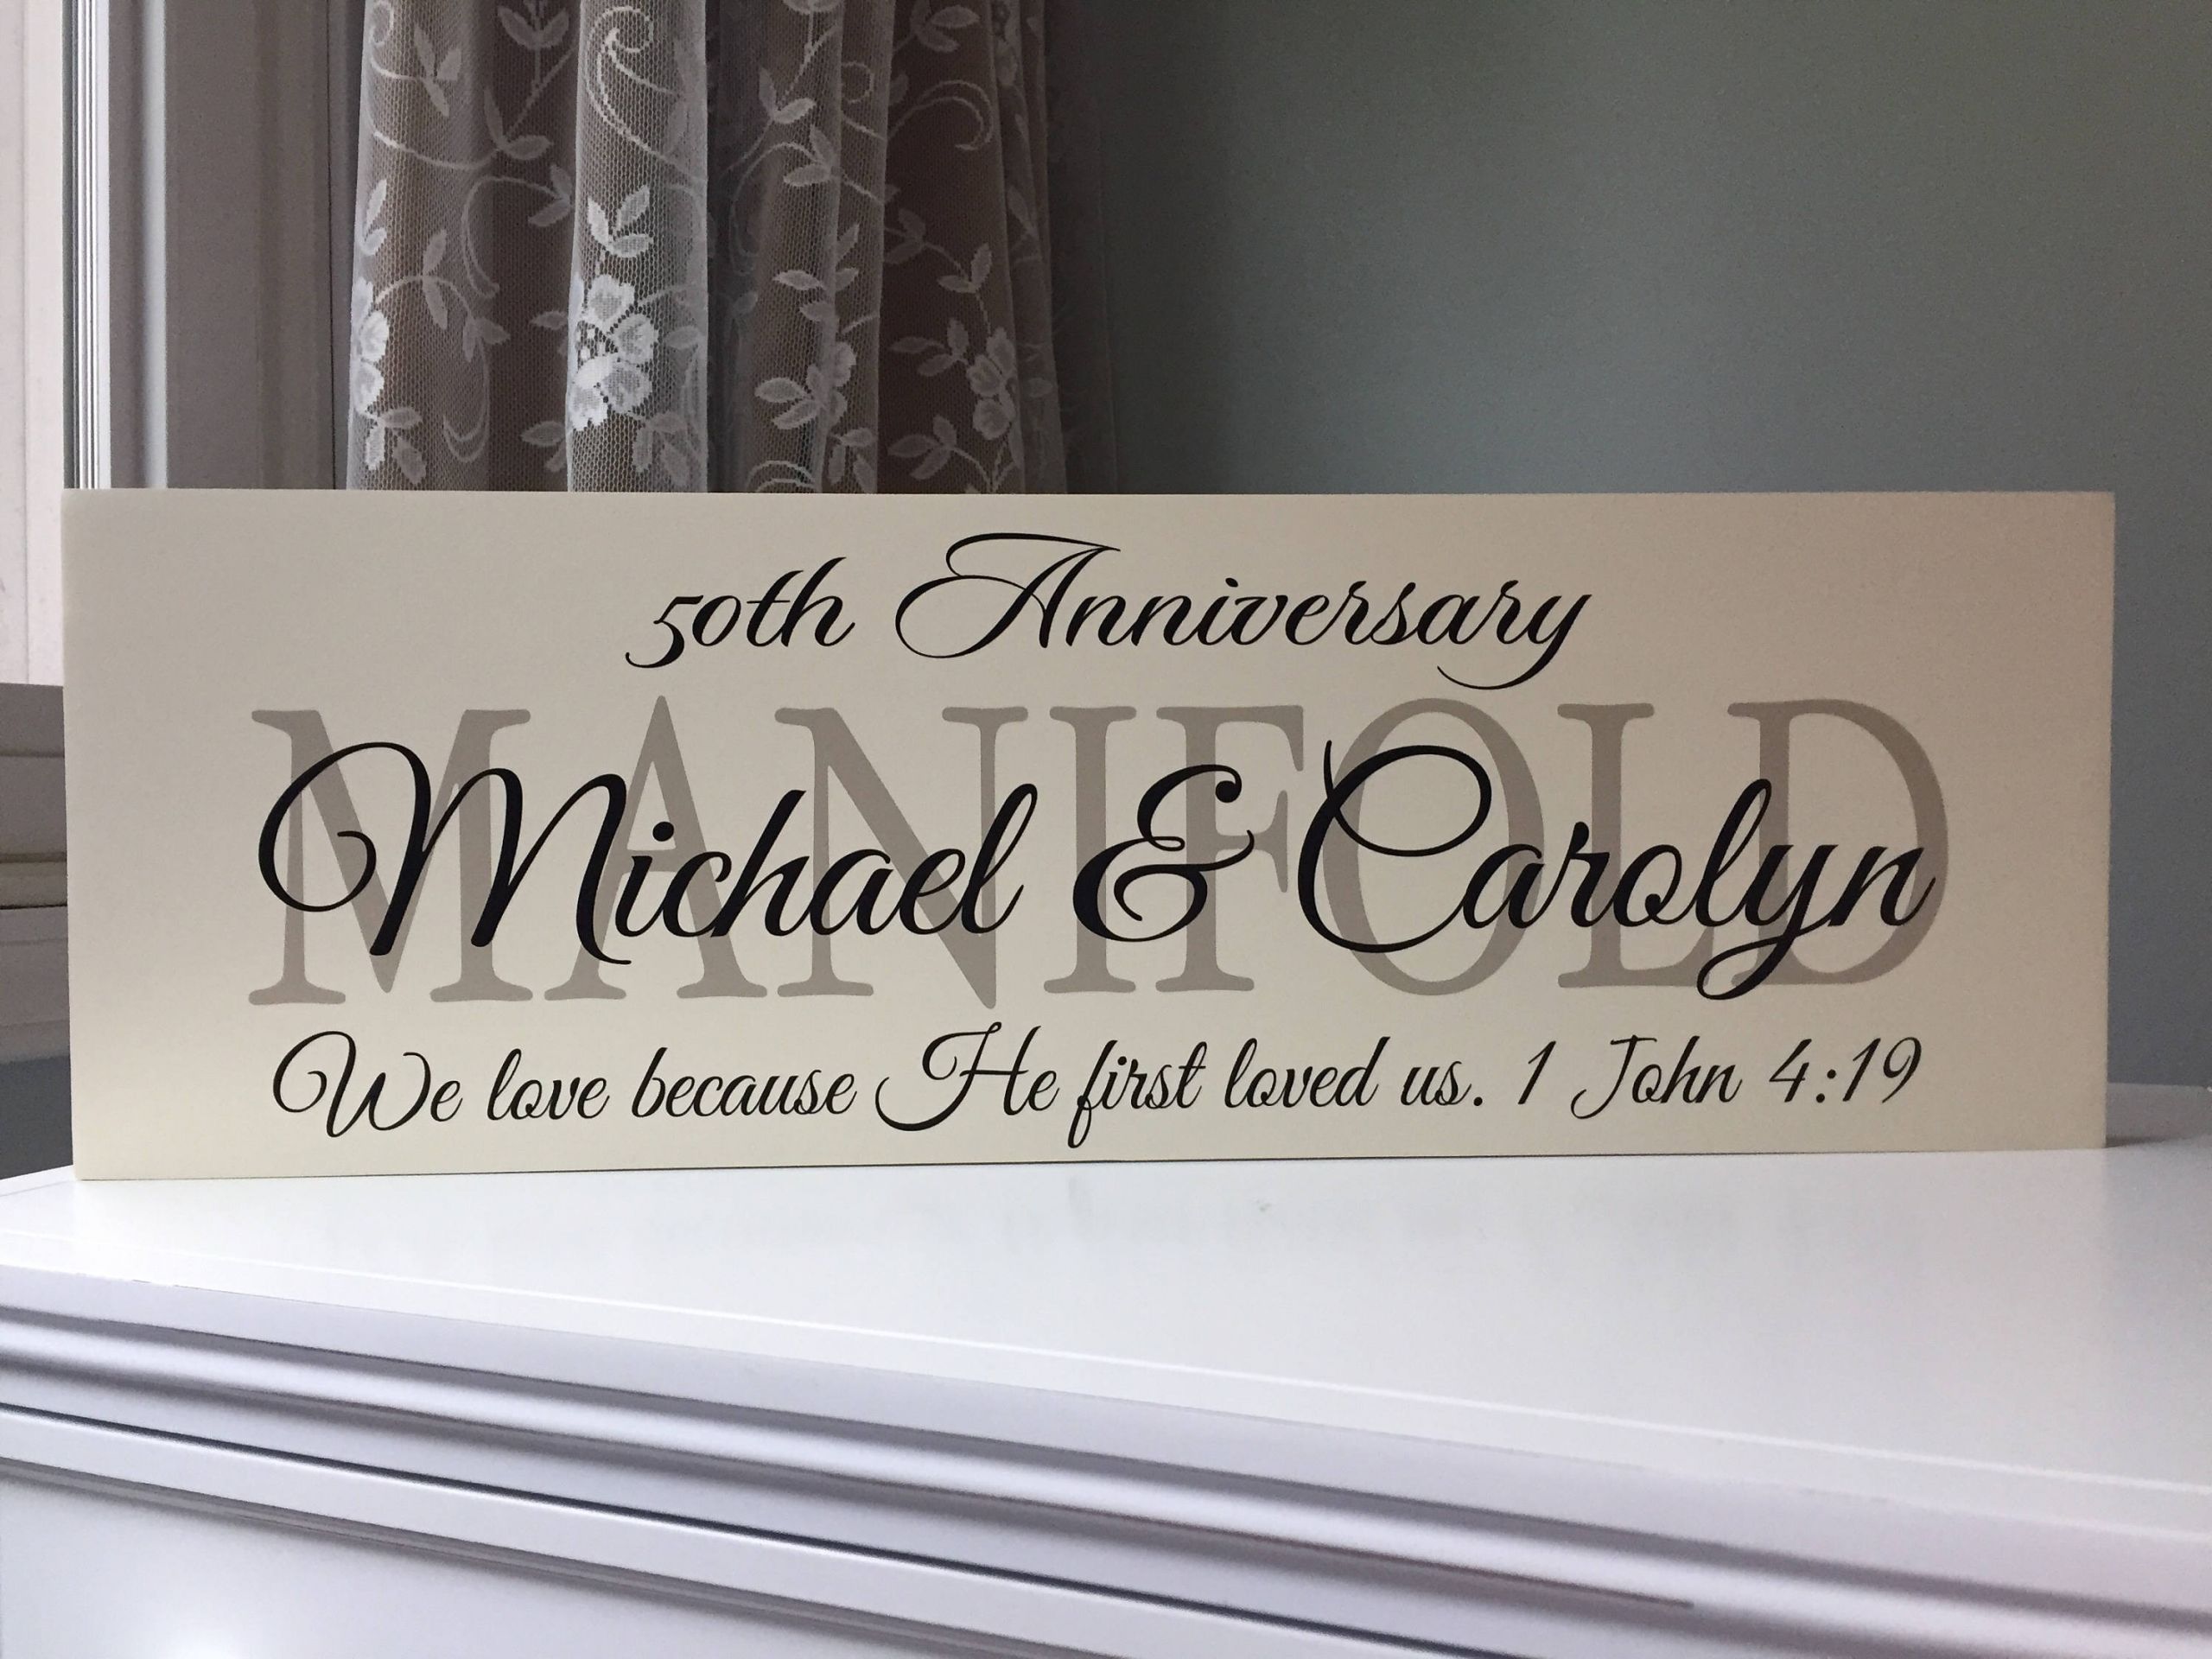 Gift Ideas For 50th Wedding Anniversary
 50th Wedding Anniversary Gifts for Parents Gift Ideas party